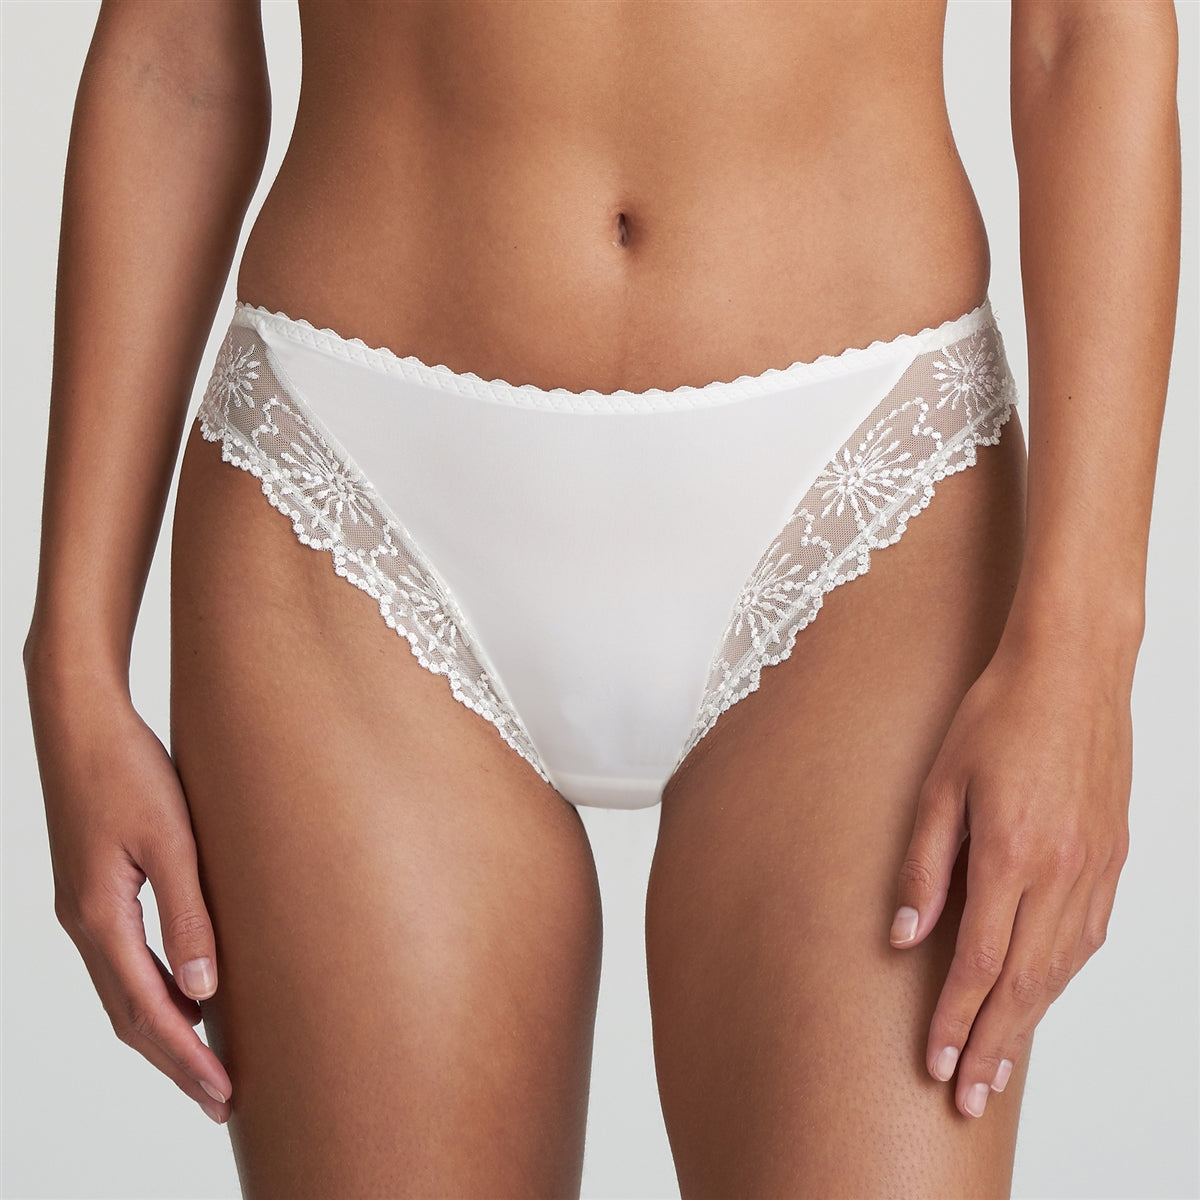 Playful and feminine ivory bikini brief with lace embroidery.